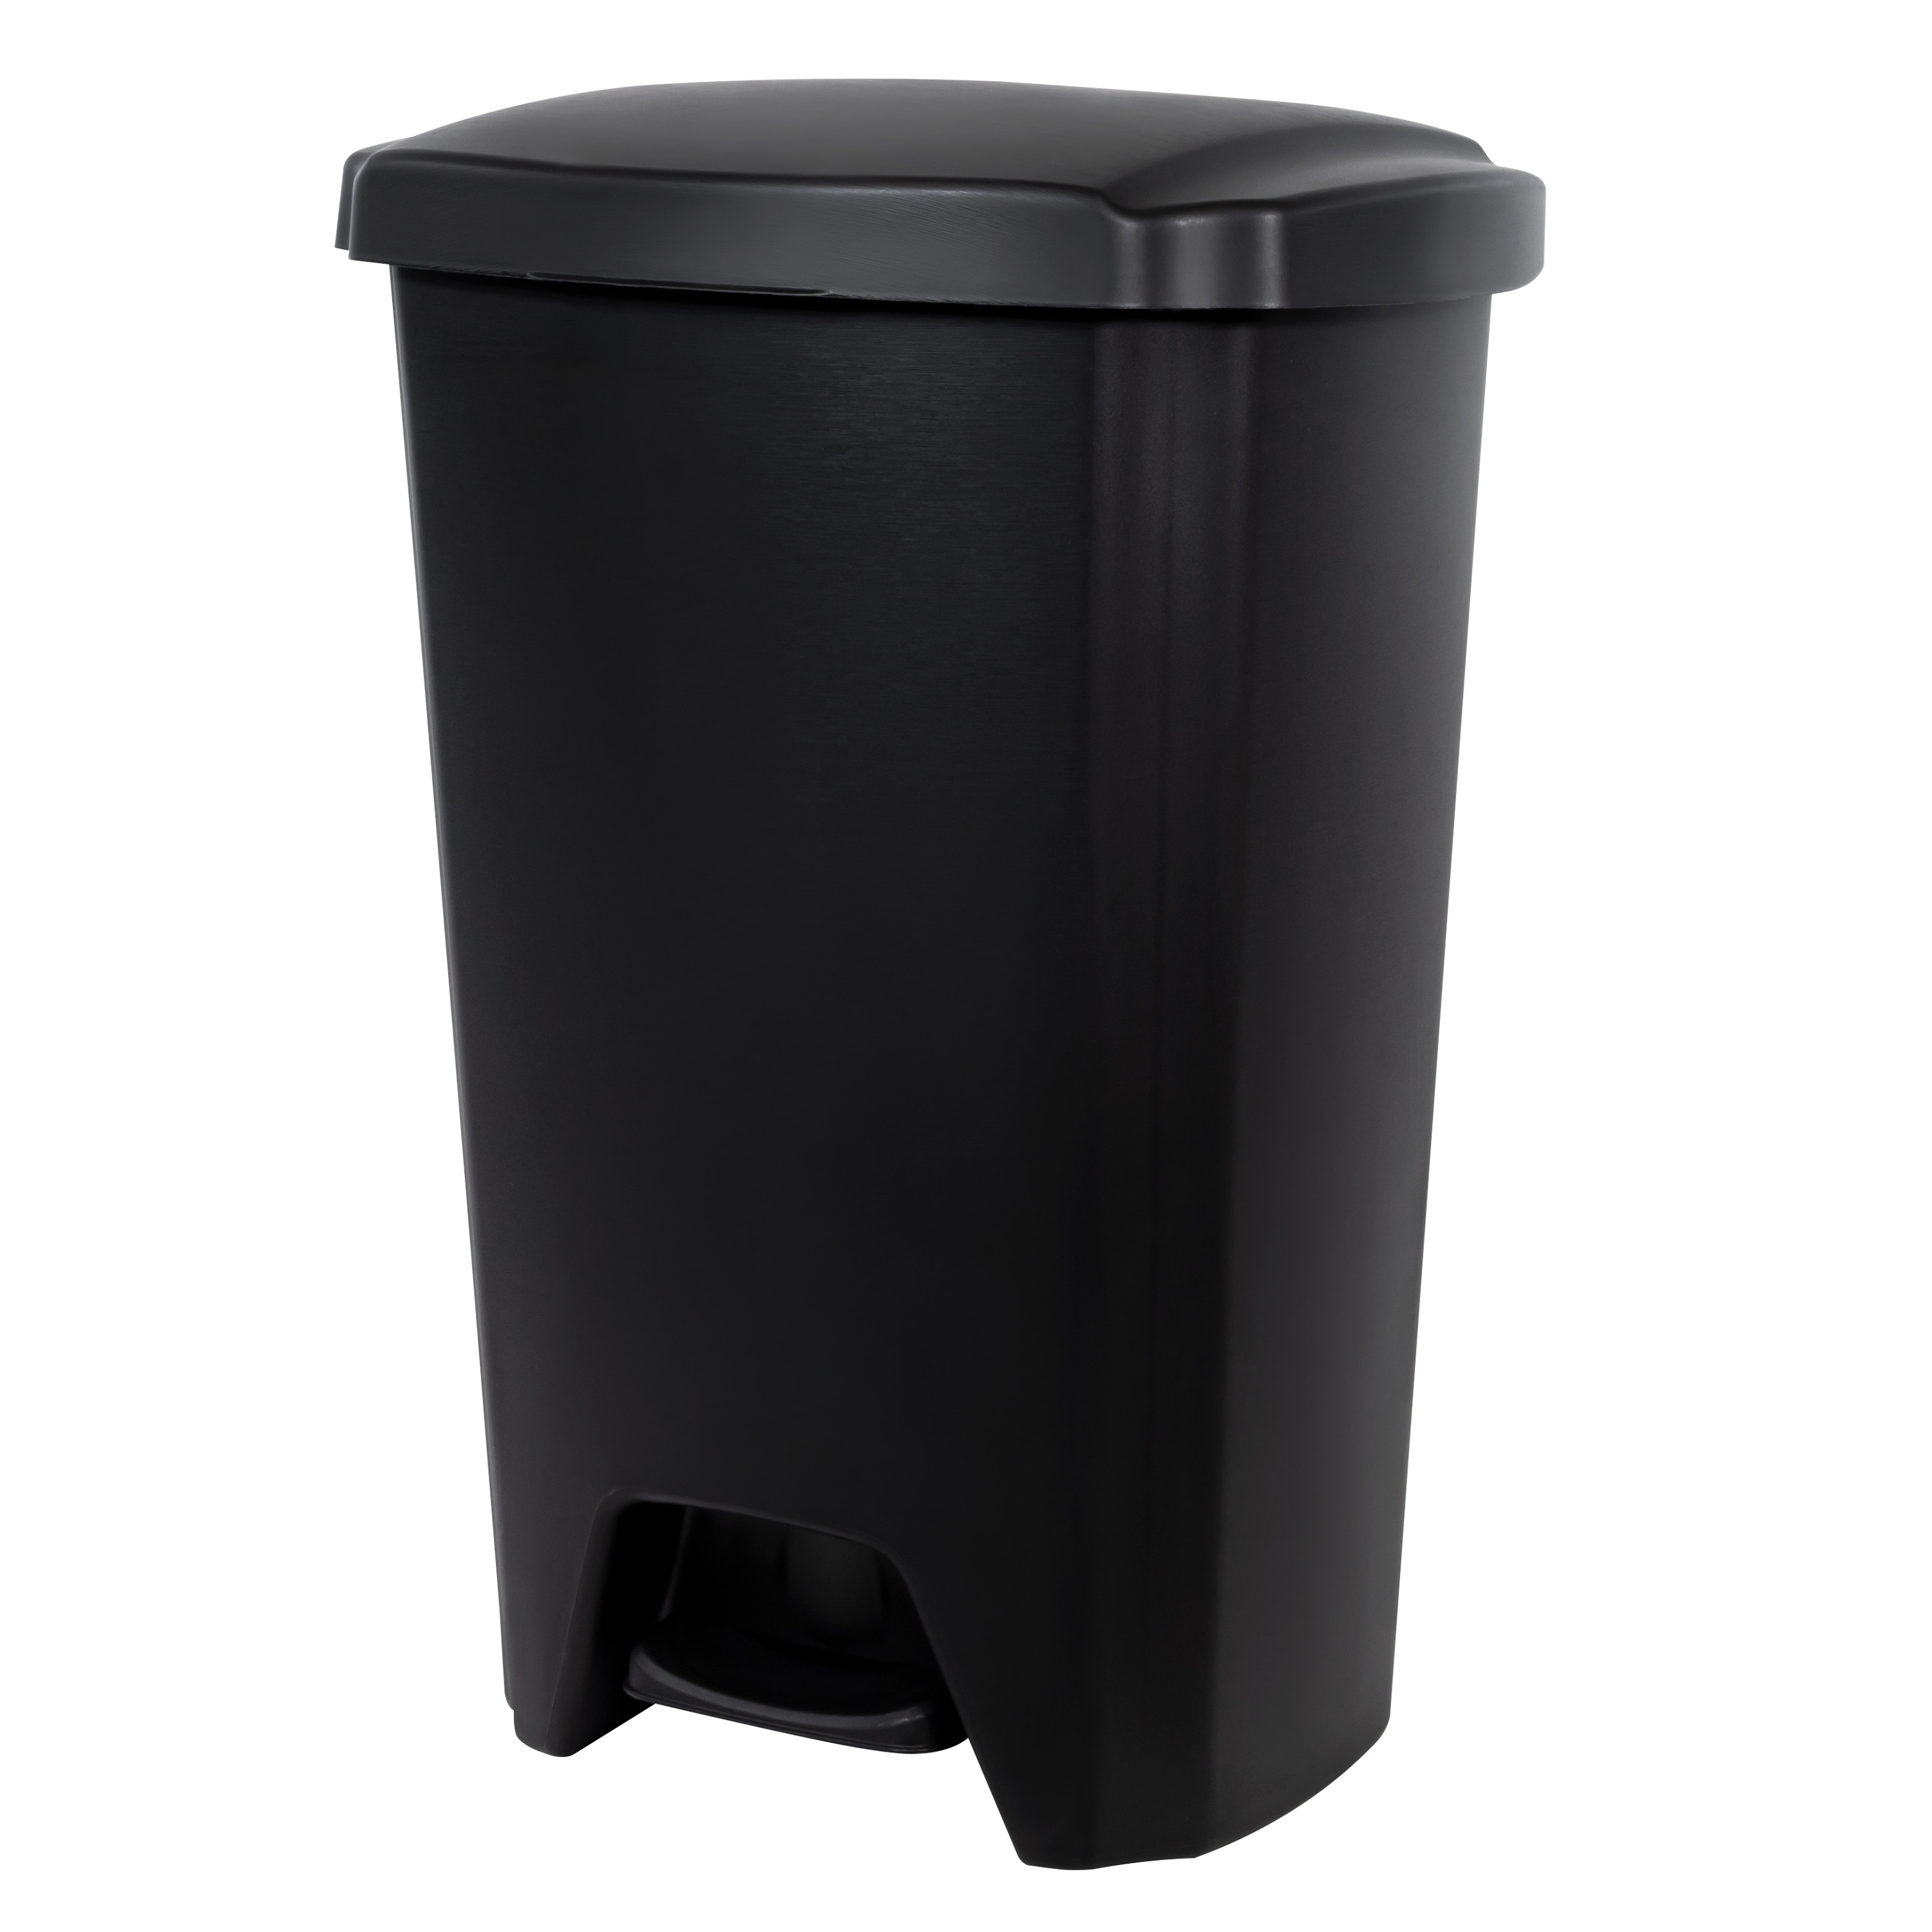 Hefty 12.1 Gallon Trash Can, Plastic Step On Kitchen Trash Can, Black - image 1 of 8